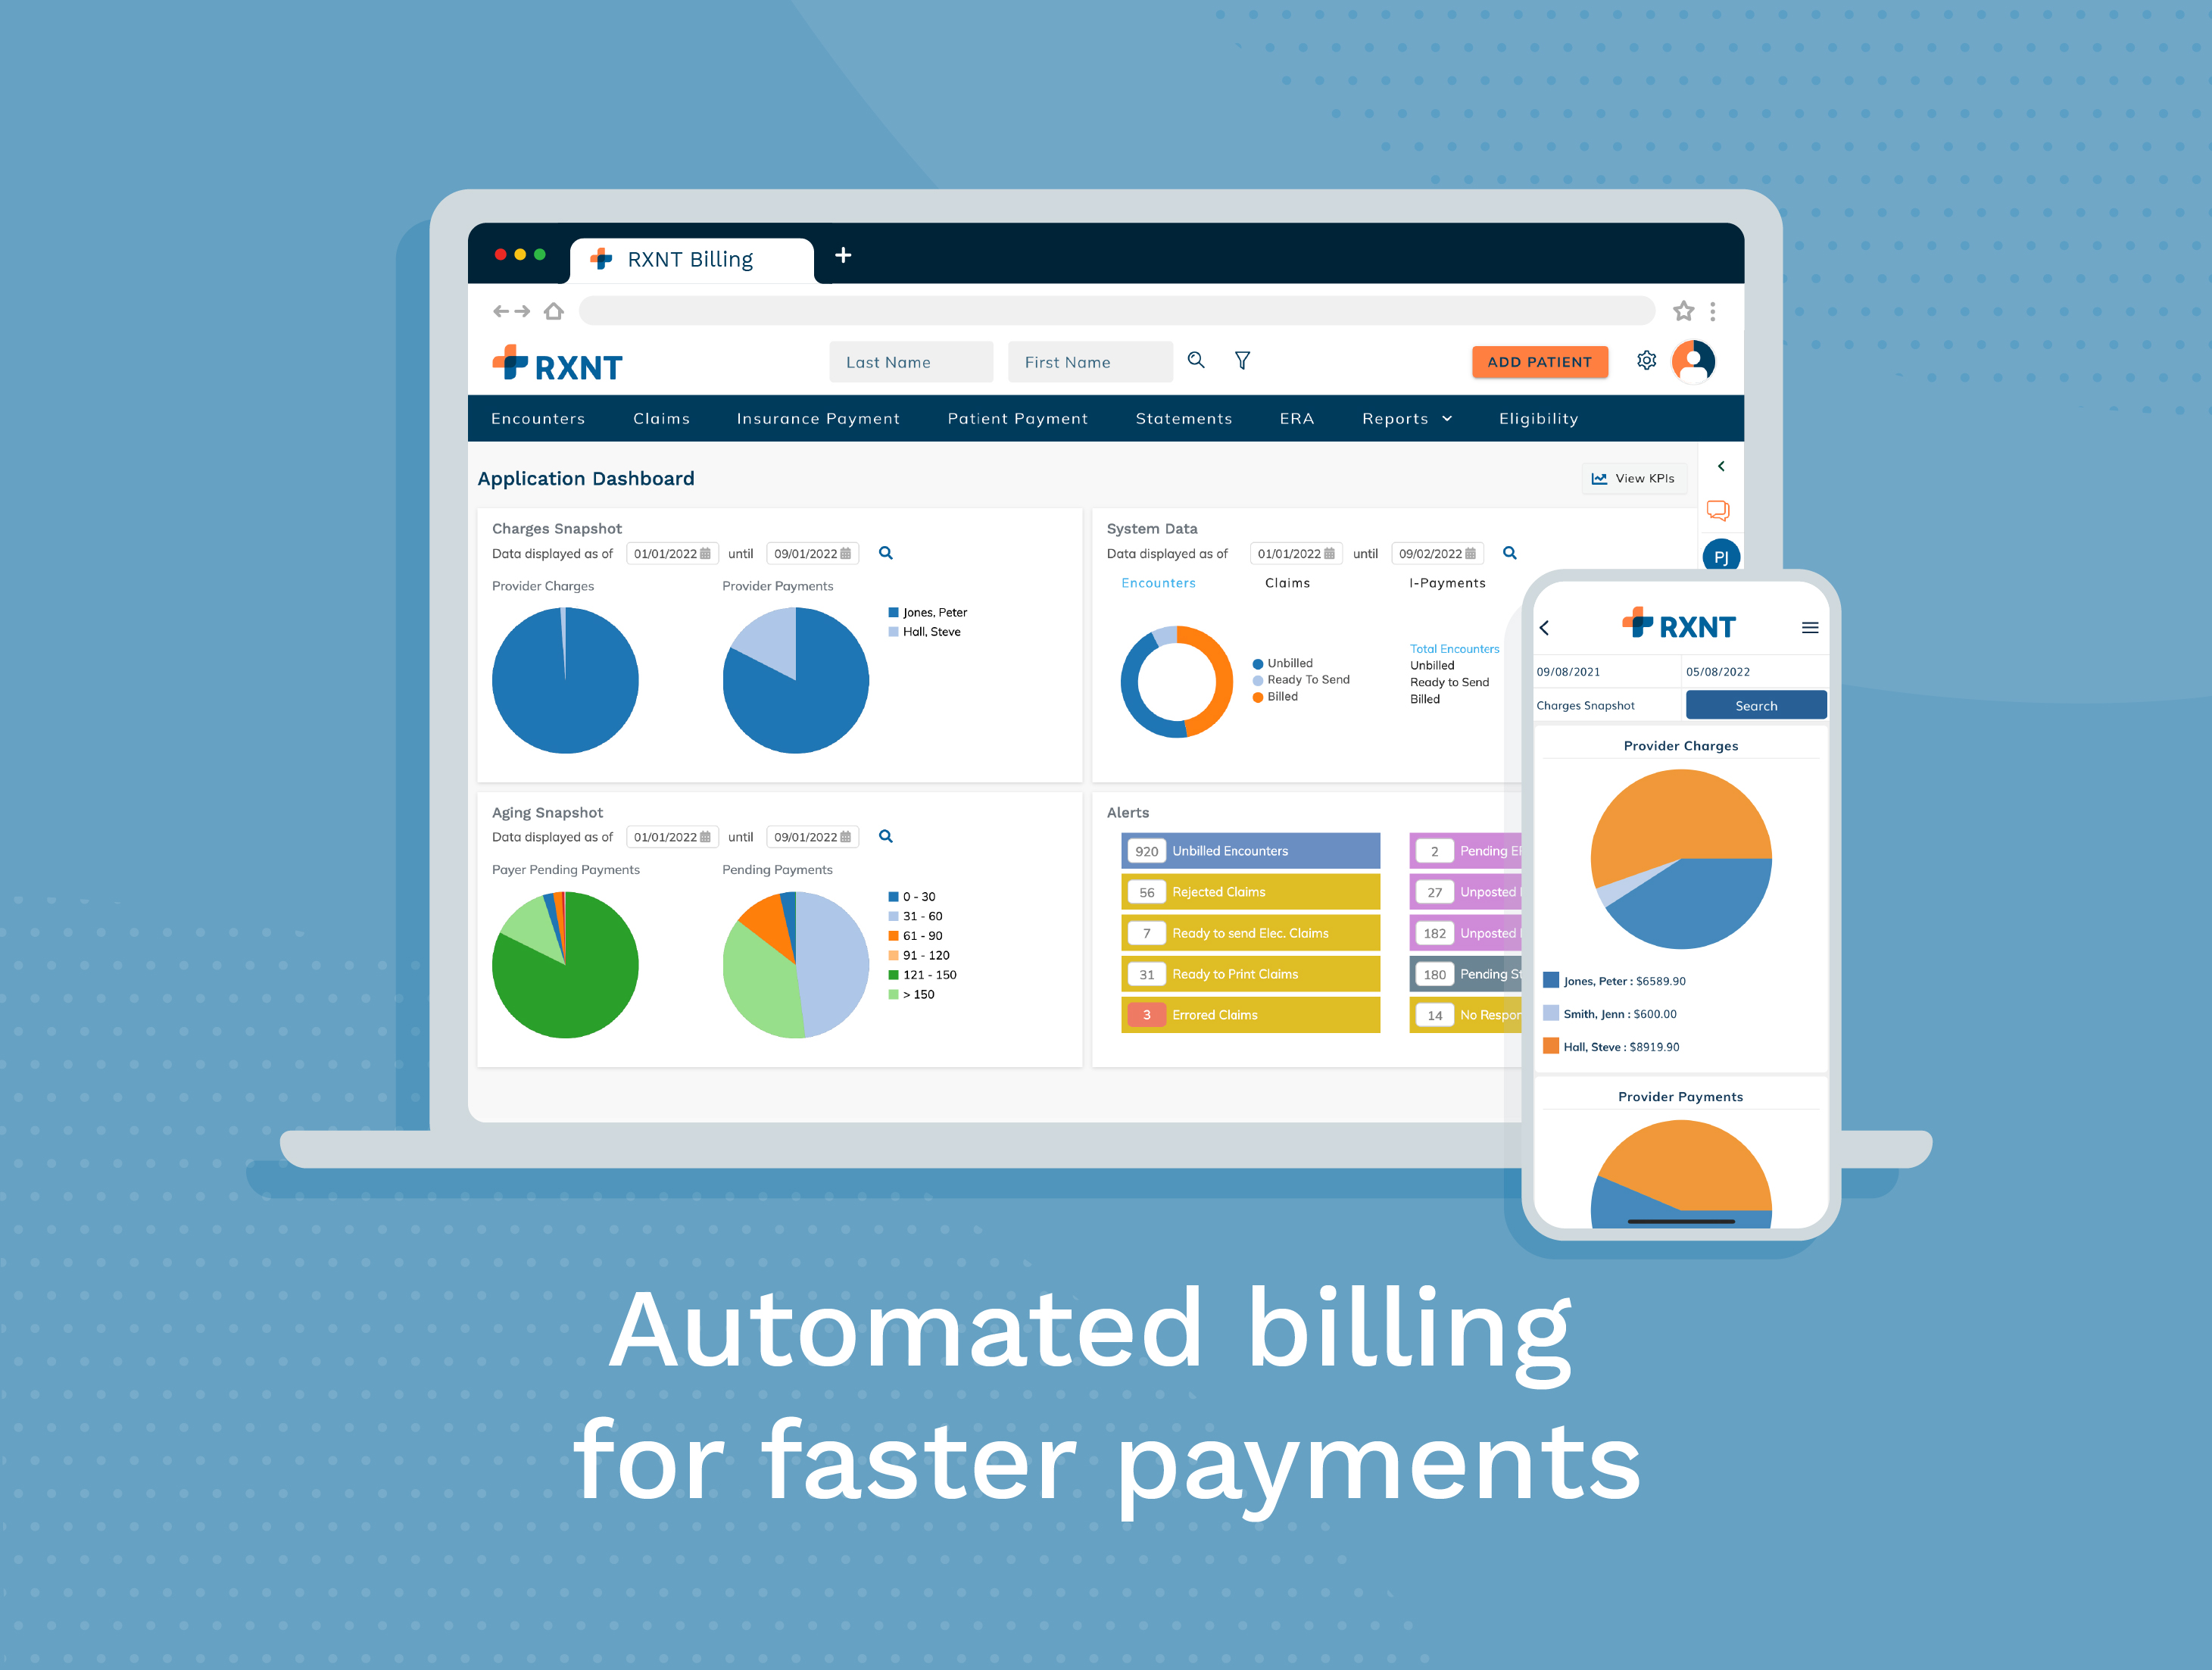 RXNT Medical Billing Software. Automated billing for faster payments. Manage your business and get paid faster. Keep track of charges, claims, aging, payments, alerts, and more at-a-glance. Available for desktop, tablet, & mobile (iOS & Android).